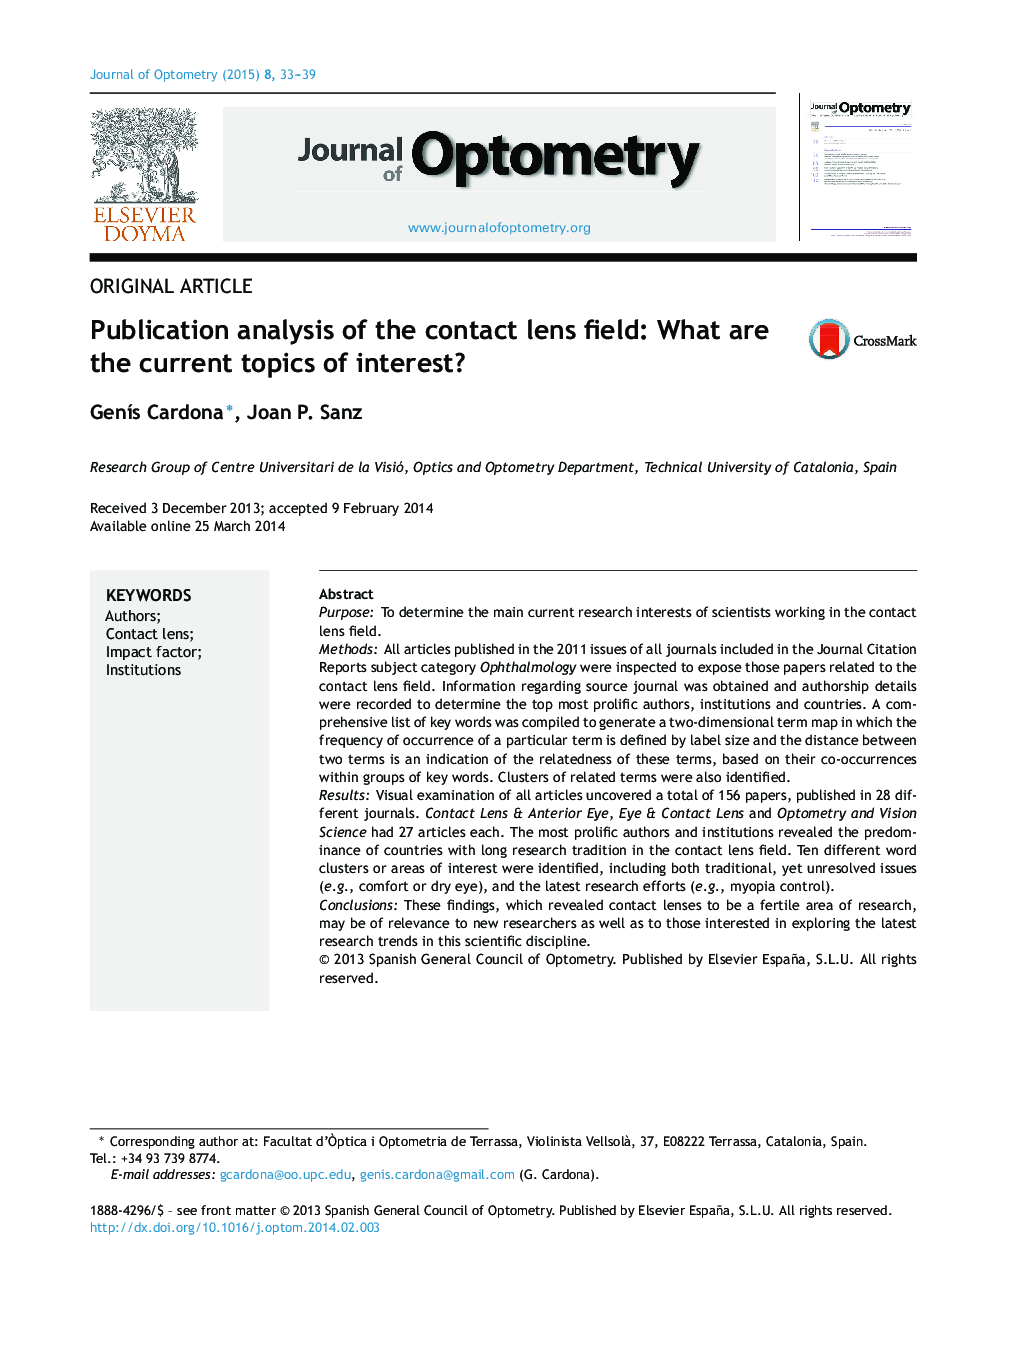 Publication analysis of the contact lens field: What are the current topics of interest?